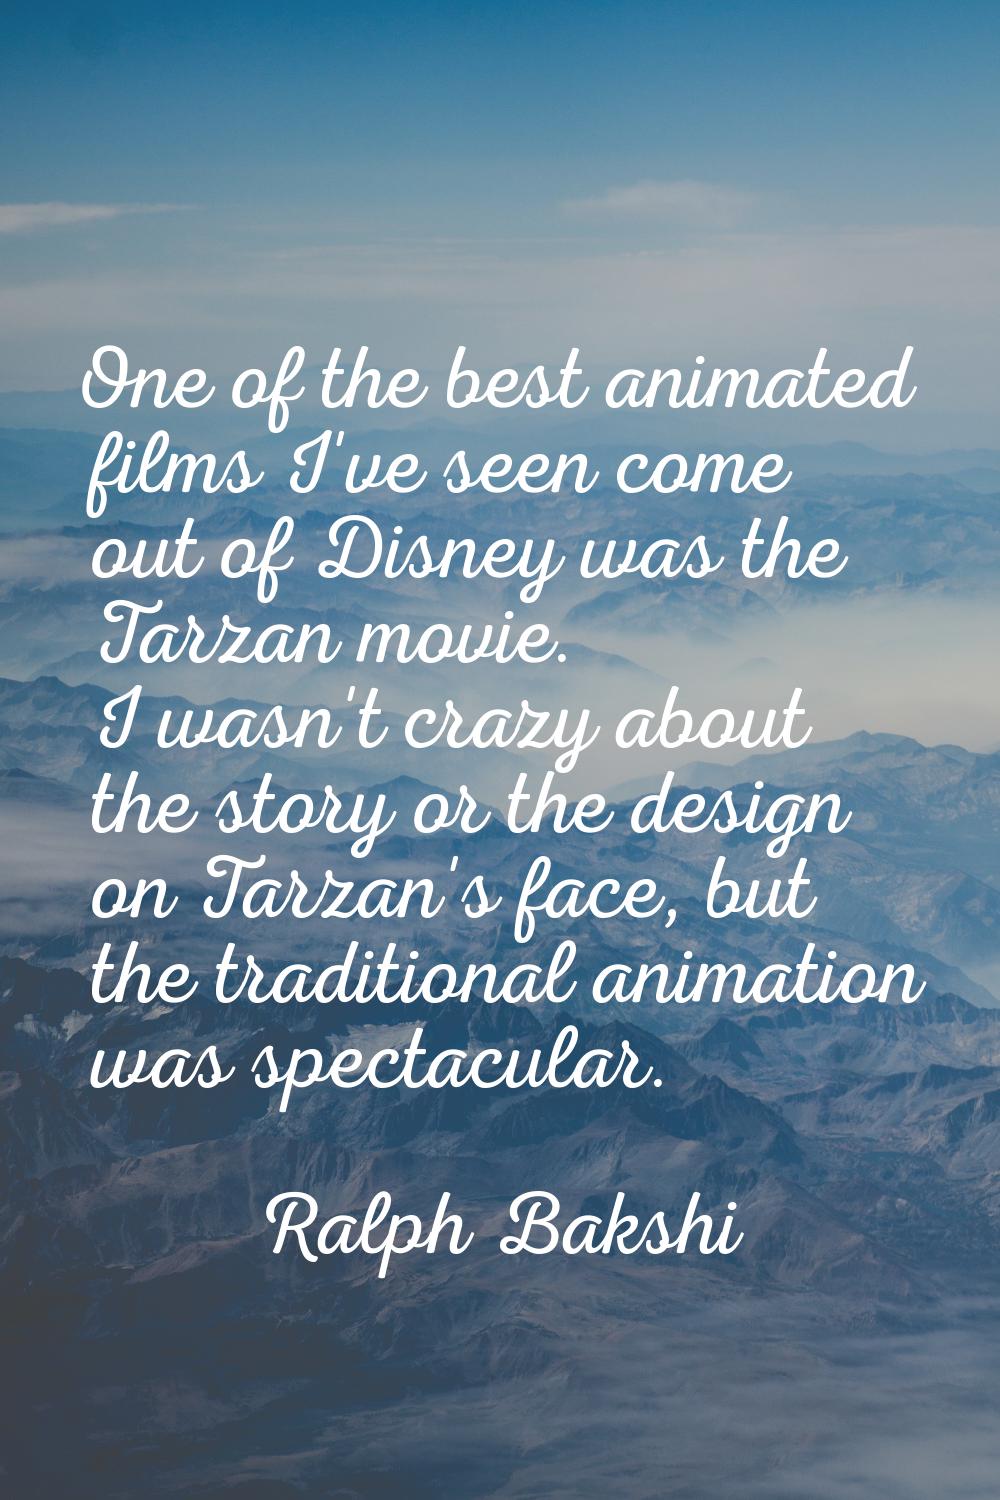 One of the best animated films I've seen come out of Disney was the Tarzan movie. I wasn't crazy ab